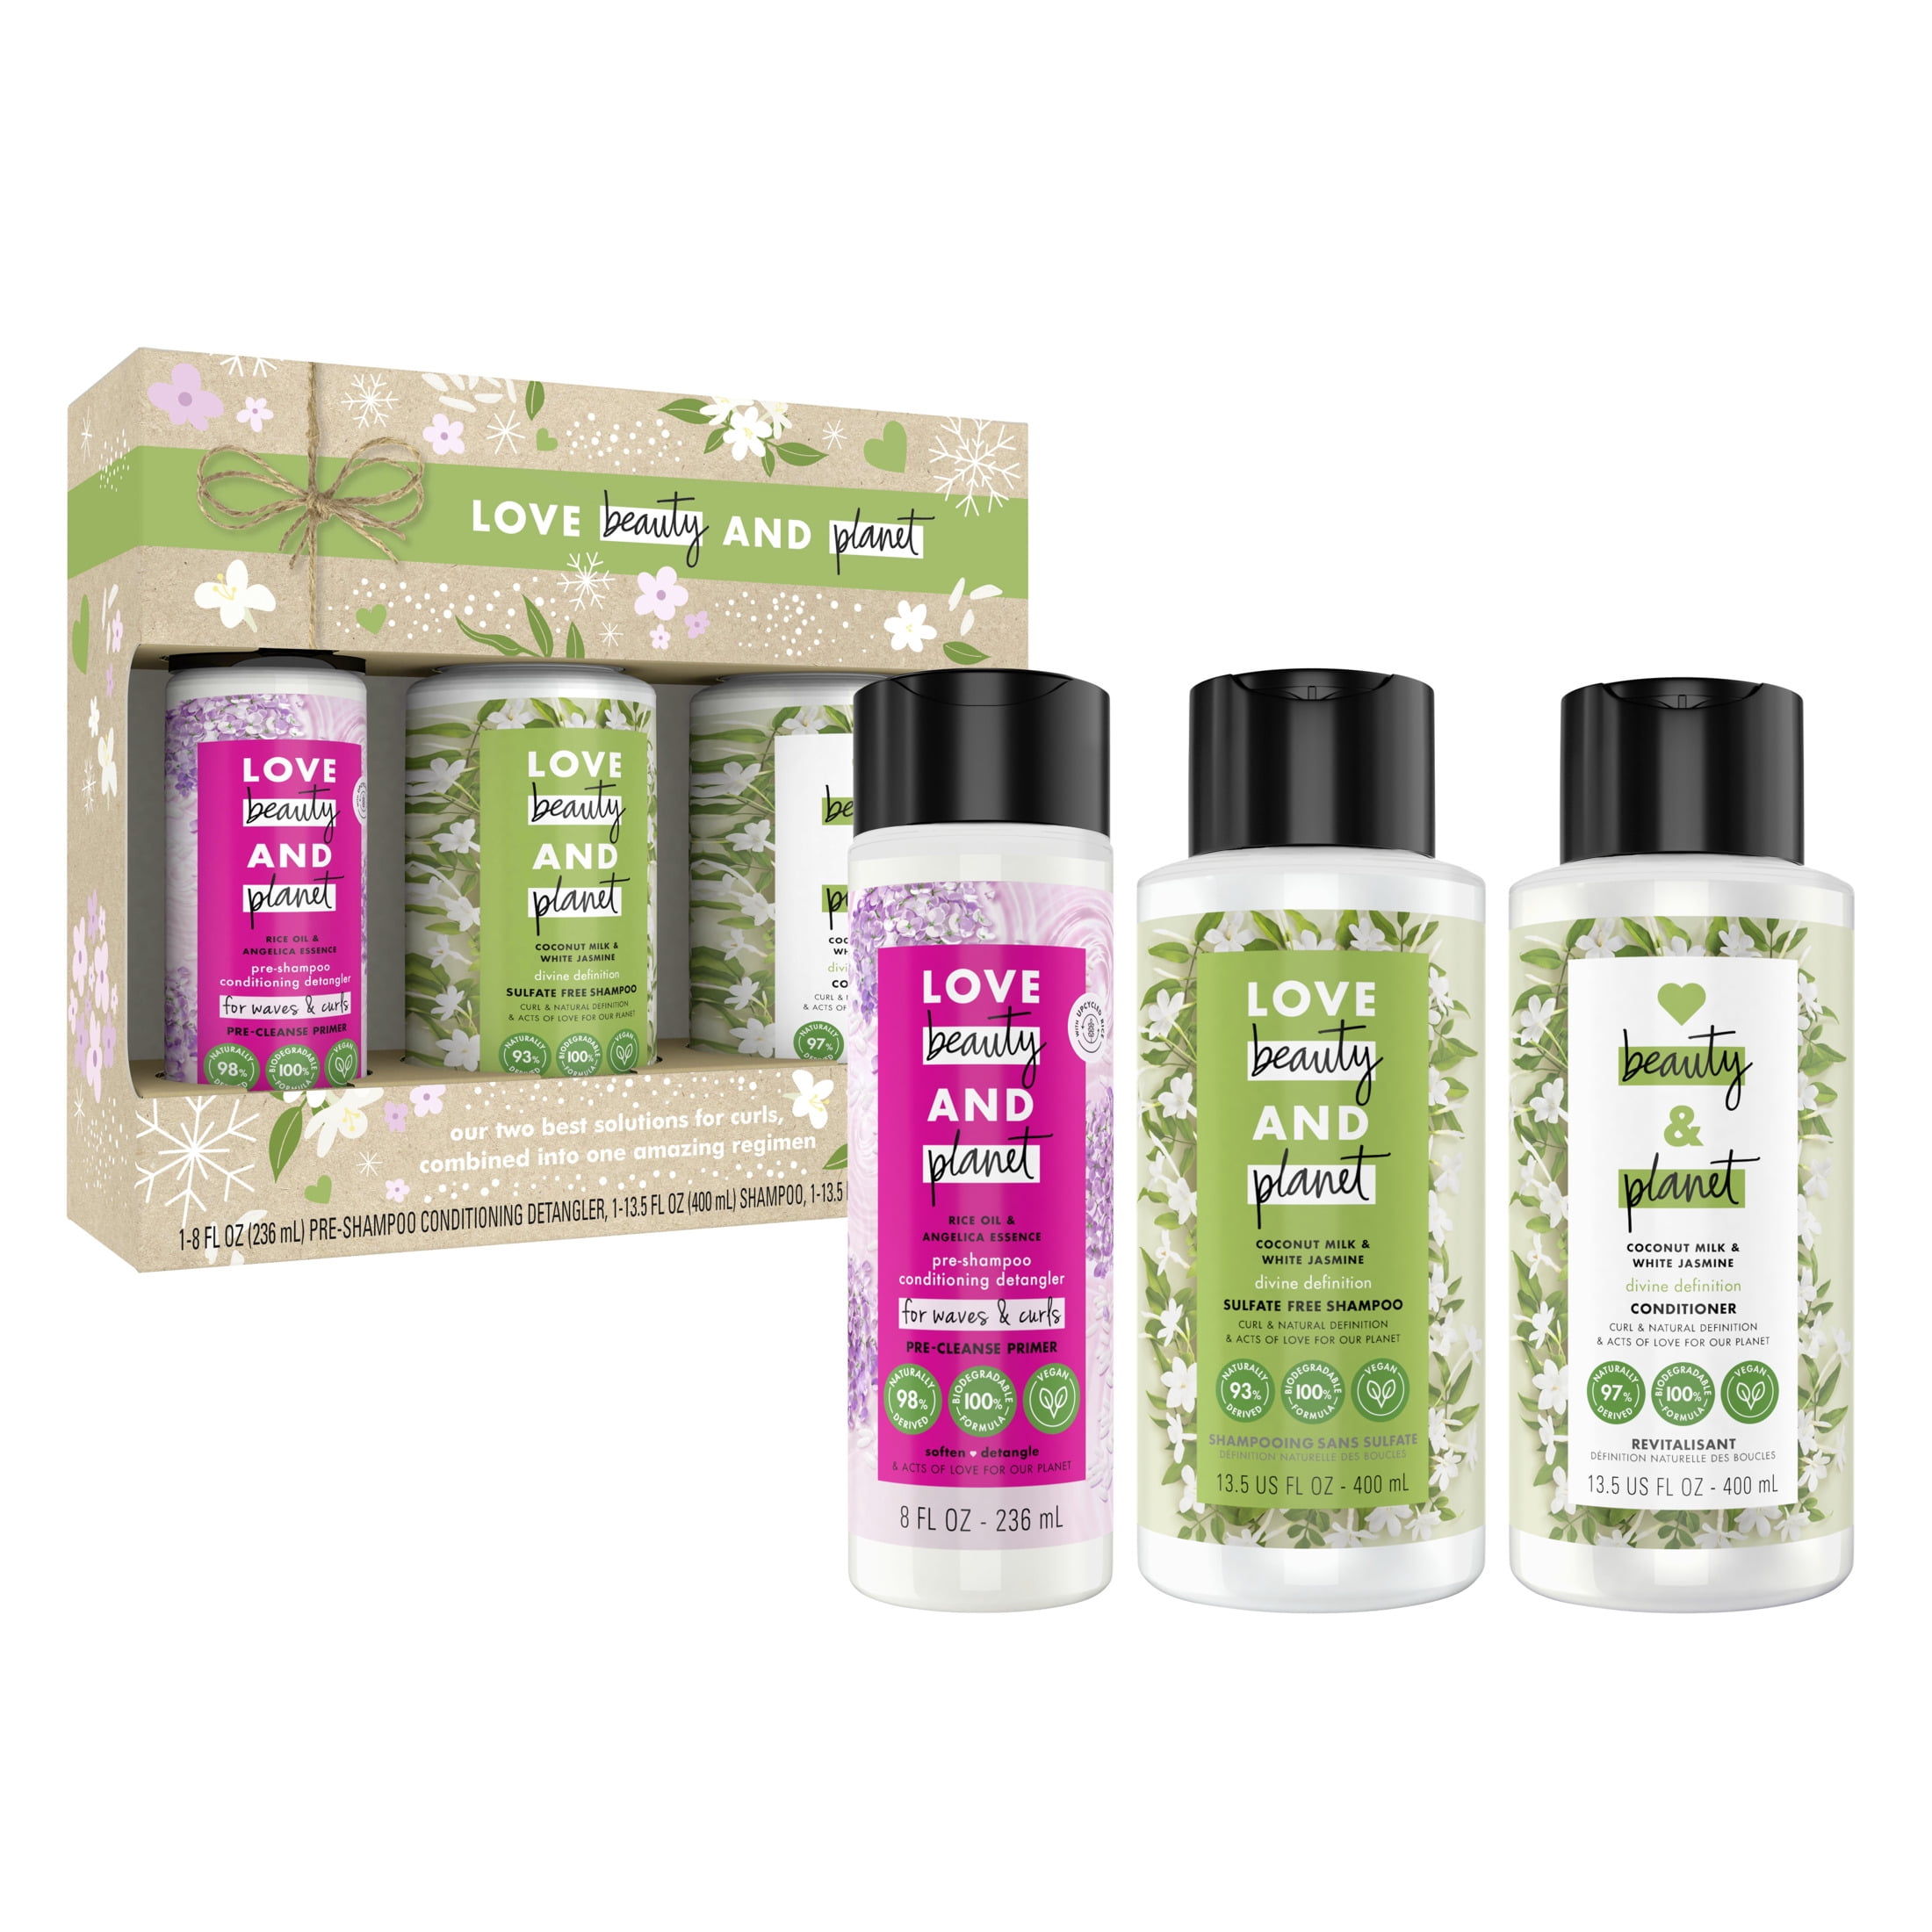 ($20 VALUE) Love Beauty and Planet Coconut Milk & Jasmine Shampoo and Conditioner Gift Set, 3 Count